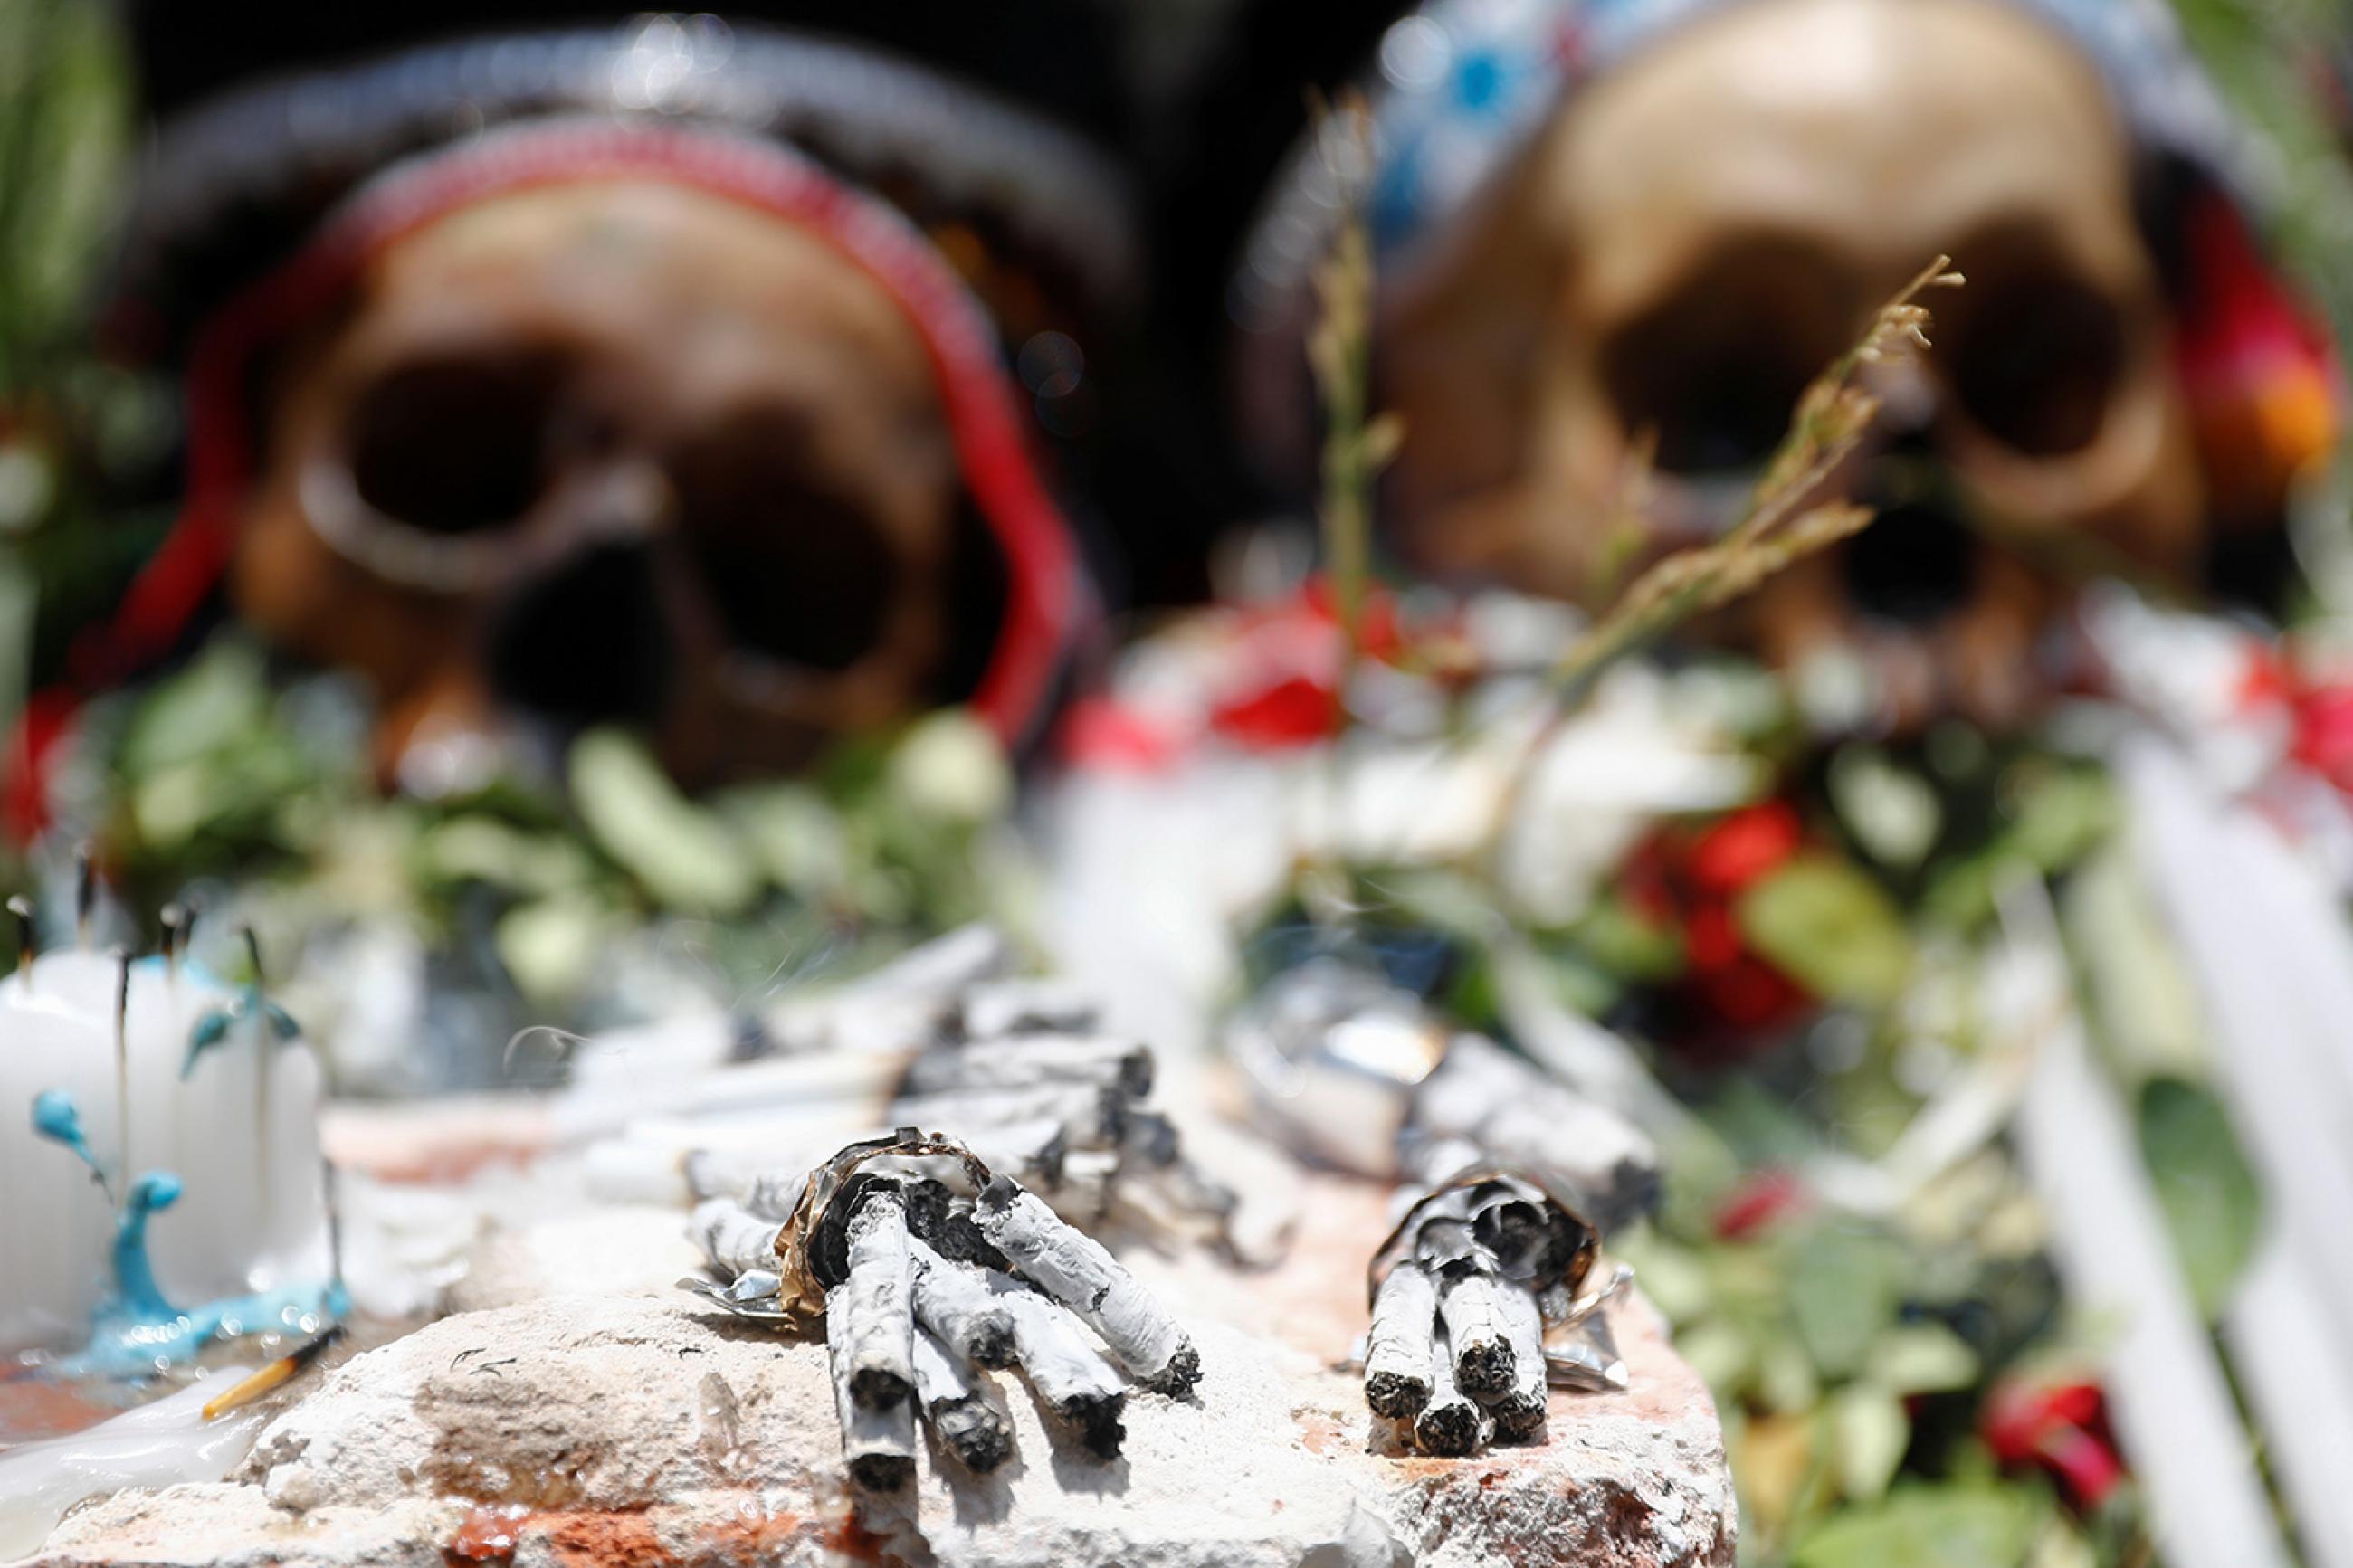 Cigarette butts are seen in front of exhibited skulls during the Day of Skulls celebrations in La Paz, Bolivia November 8, 2019. The photo shows two human skulls laid out with flowers in a ceremonial way with a number of burned cigarettes in the foreground. REUTERS/Kai Pfaffenbach